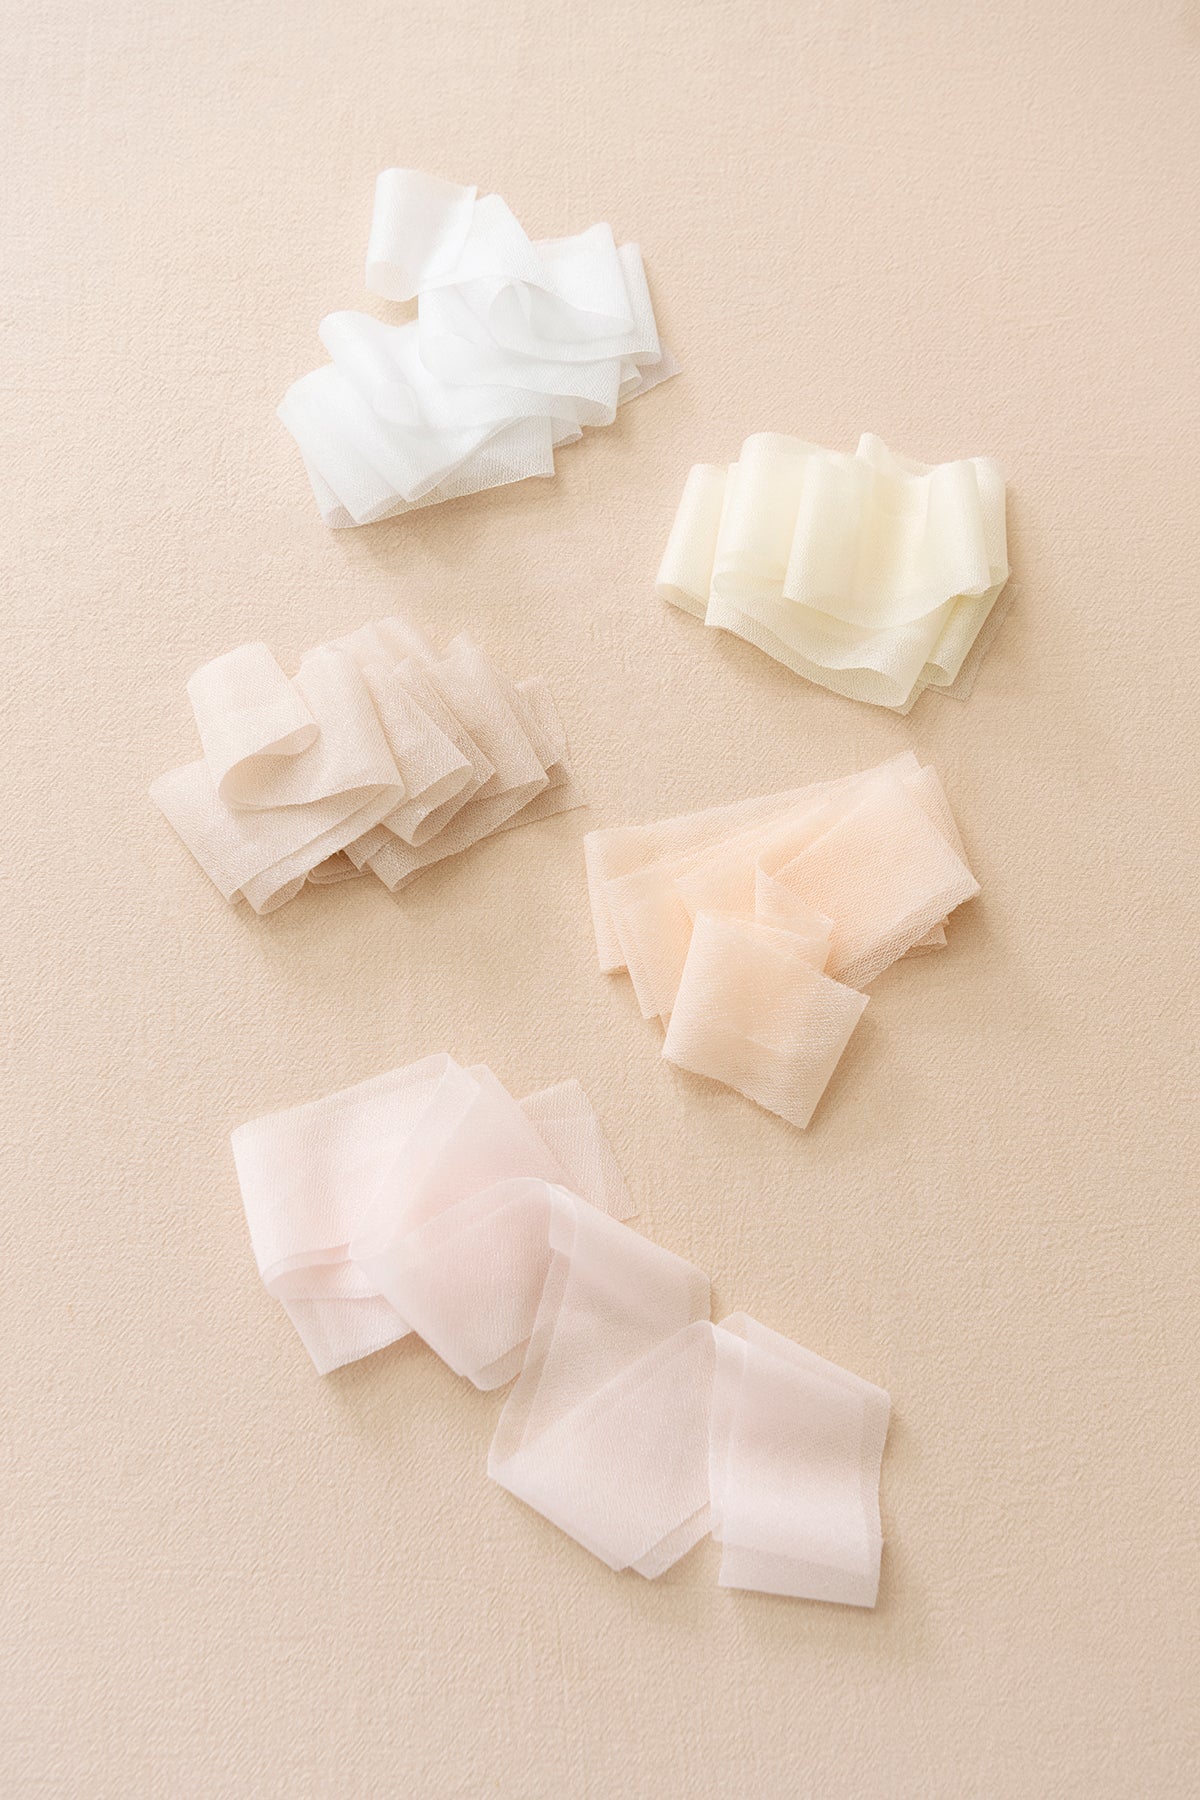 Ombre Chiffon Ribbons Swatch Chart in Blush & Cream